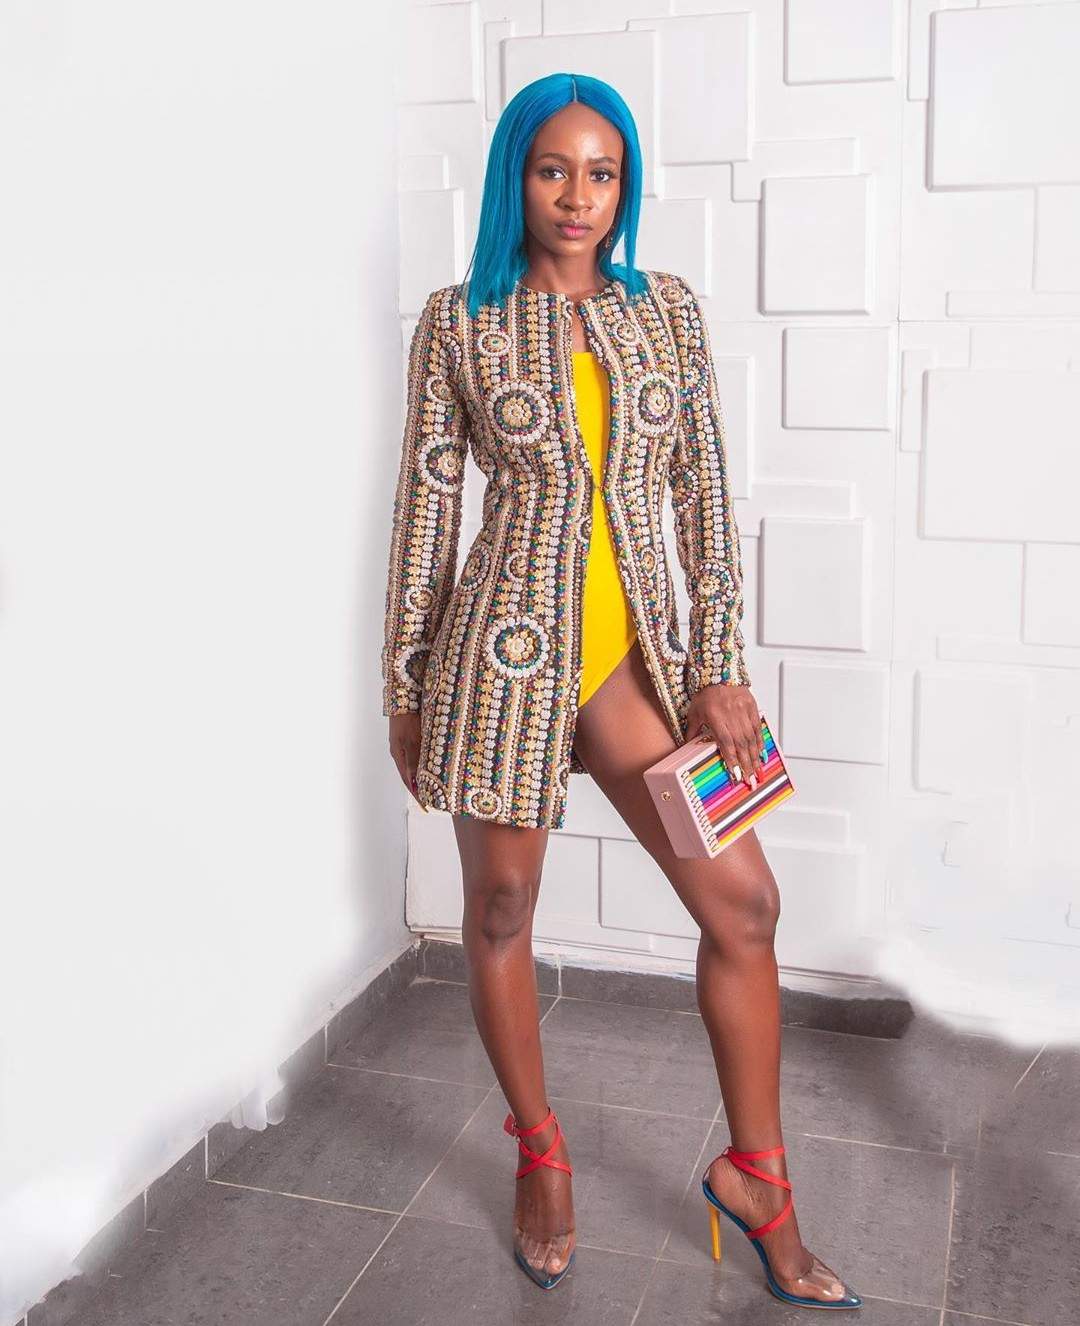 Anto Lecky's outfit to the premiere of Sugar rush movie set tongues wagging